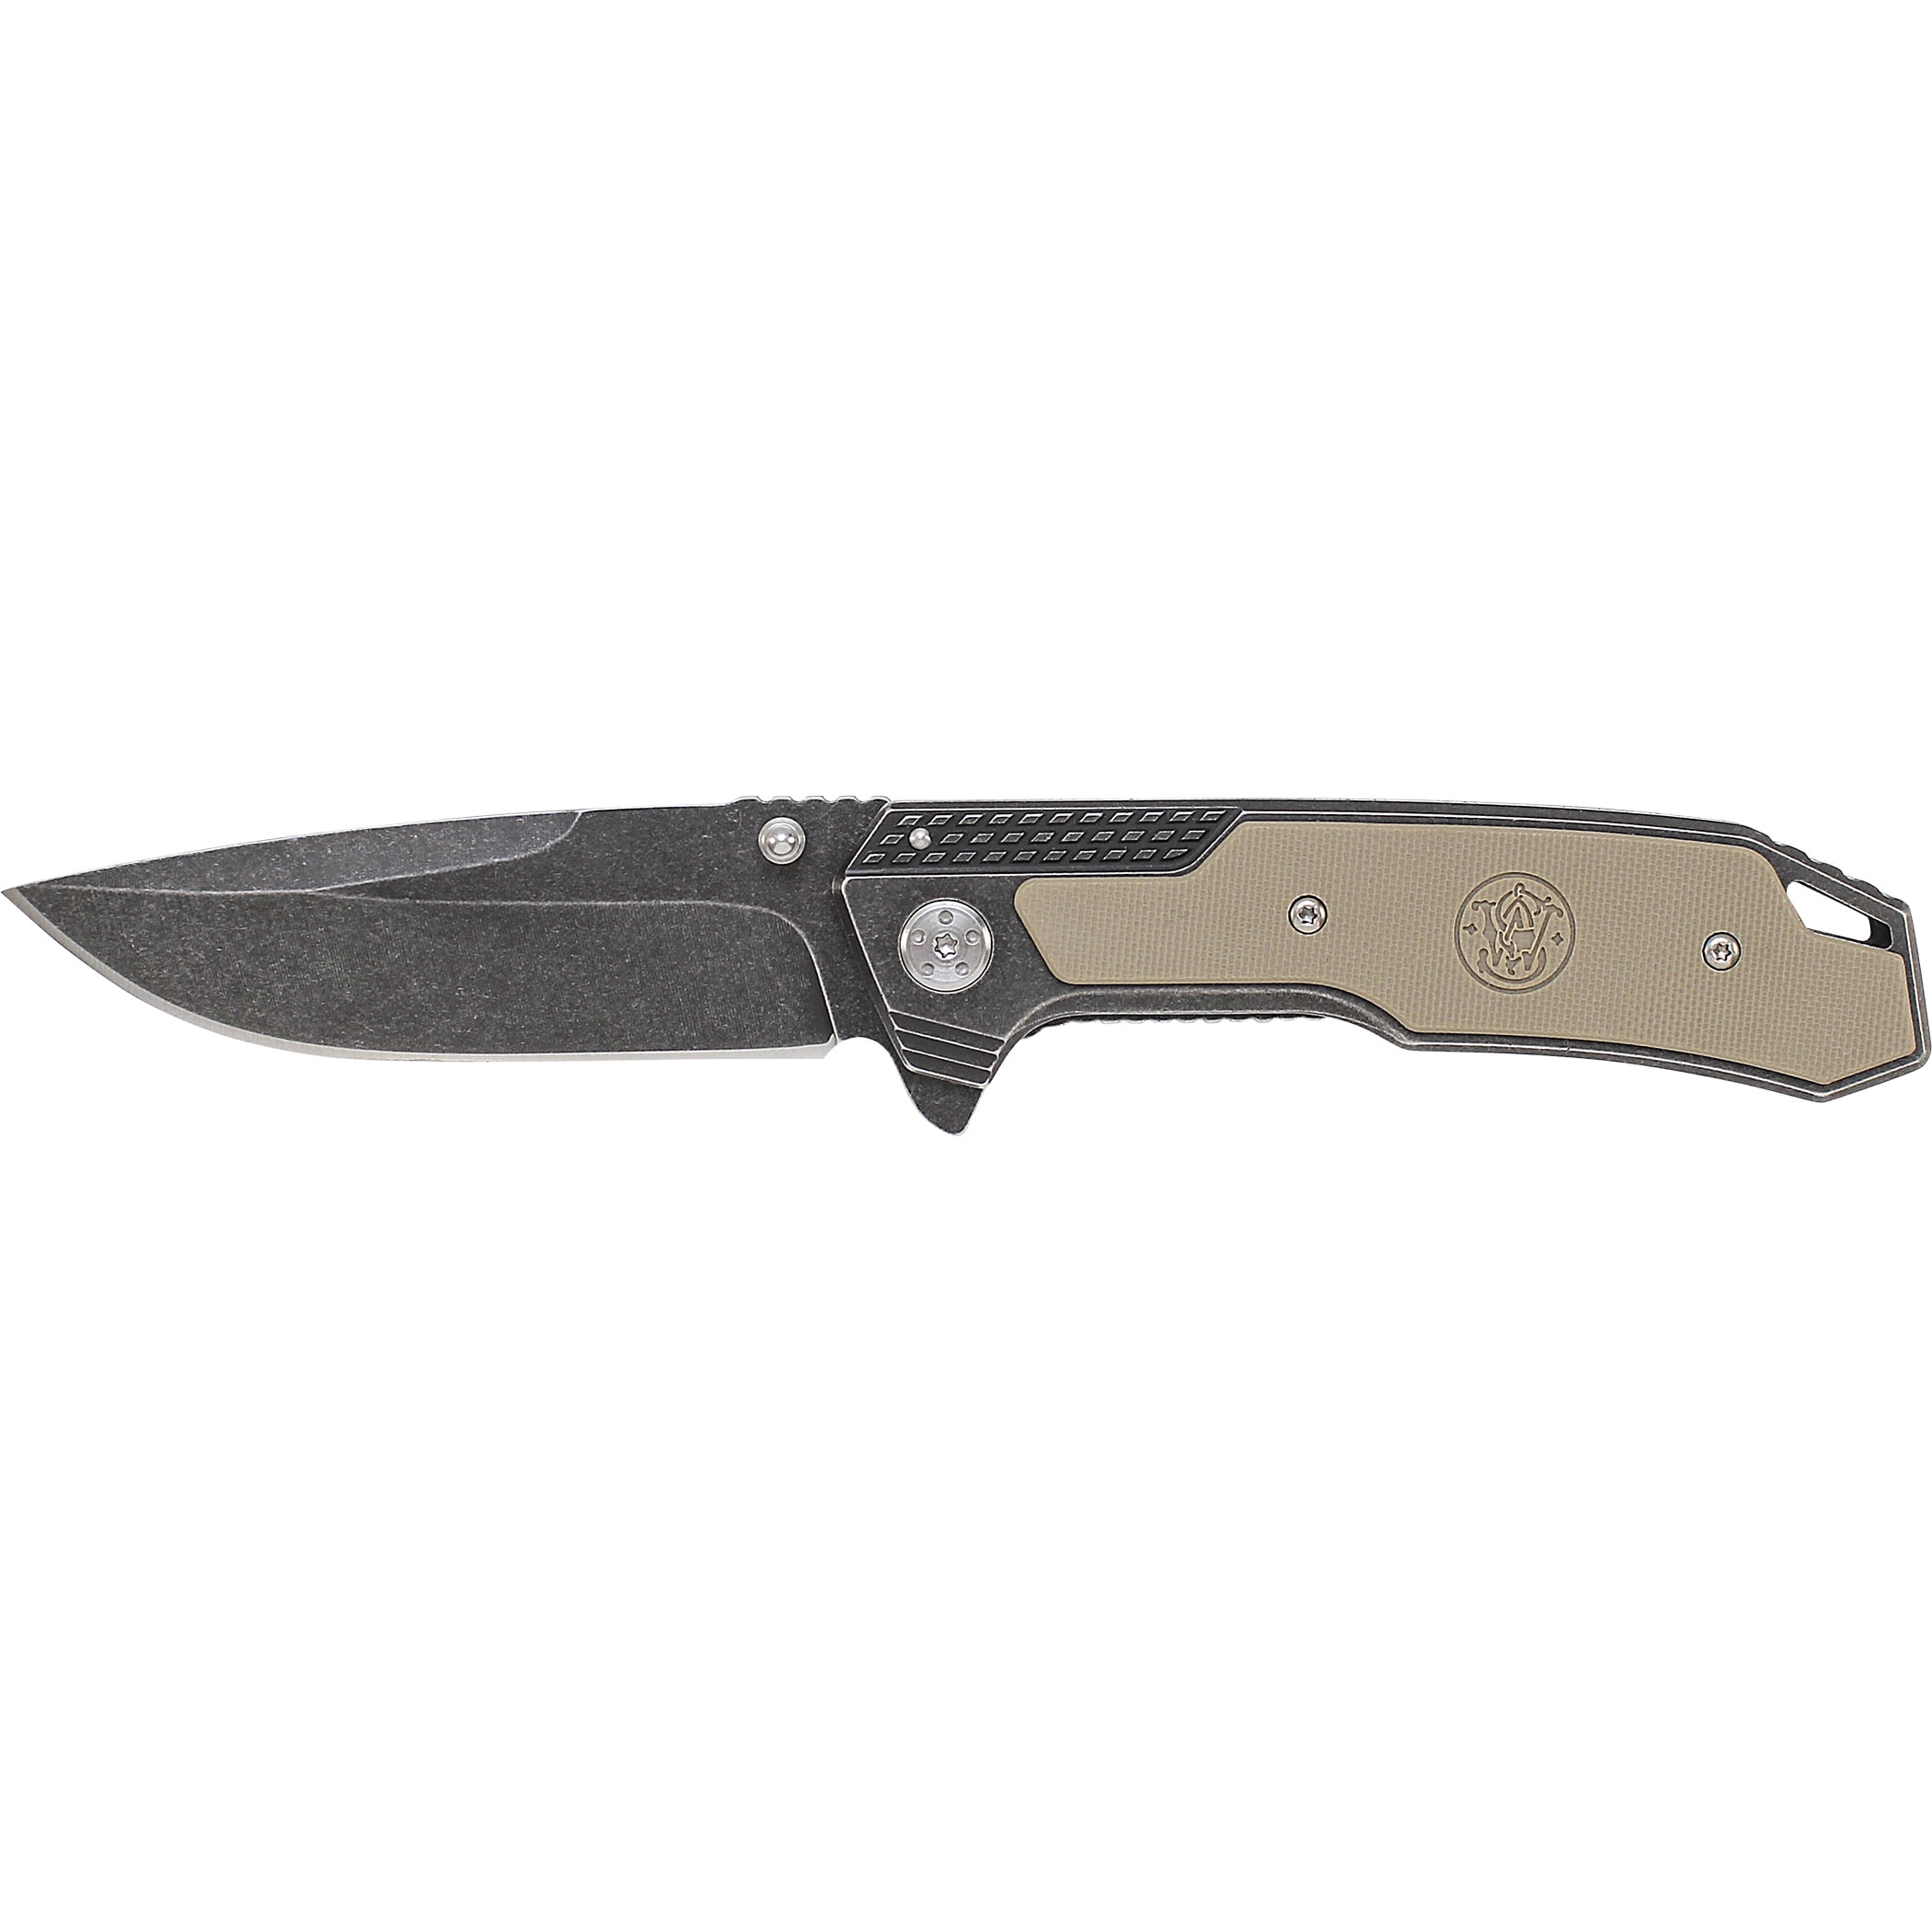 Smith & Wesson 3.6" Tactical Flipper Knife